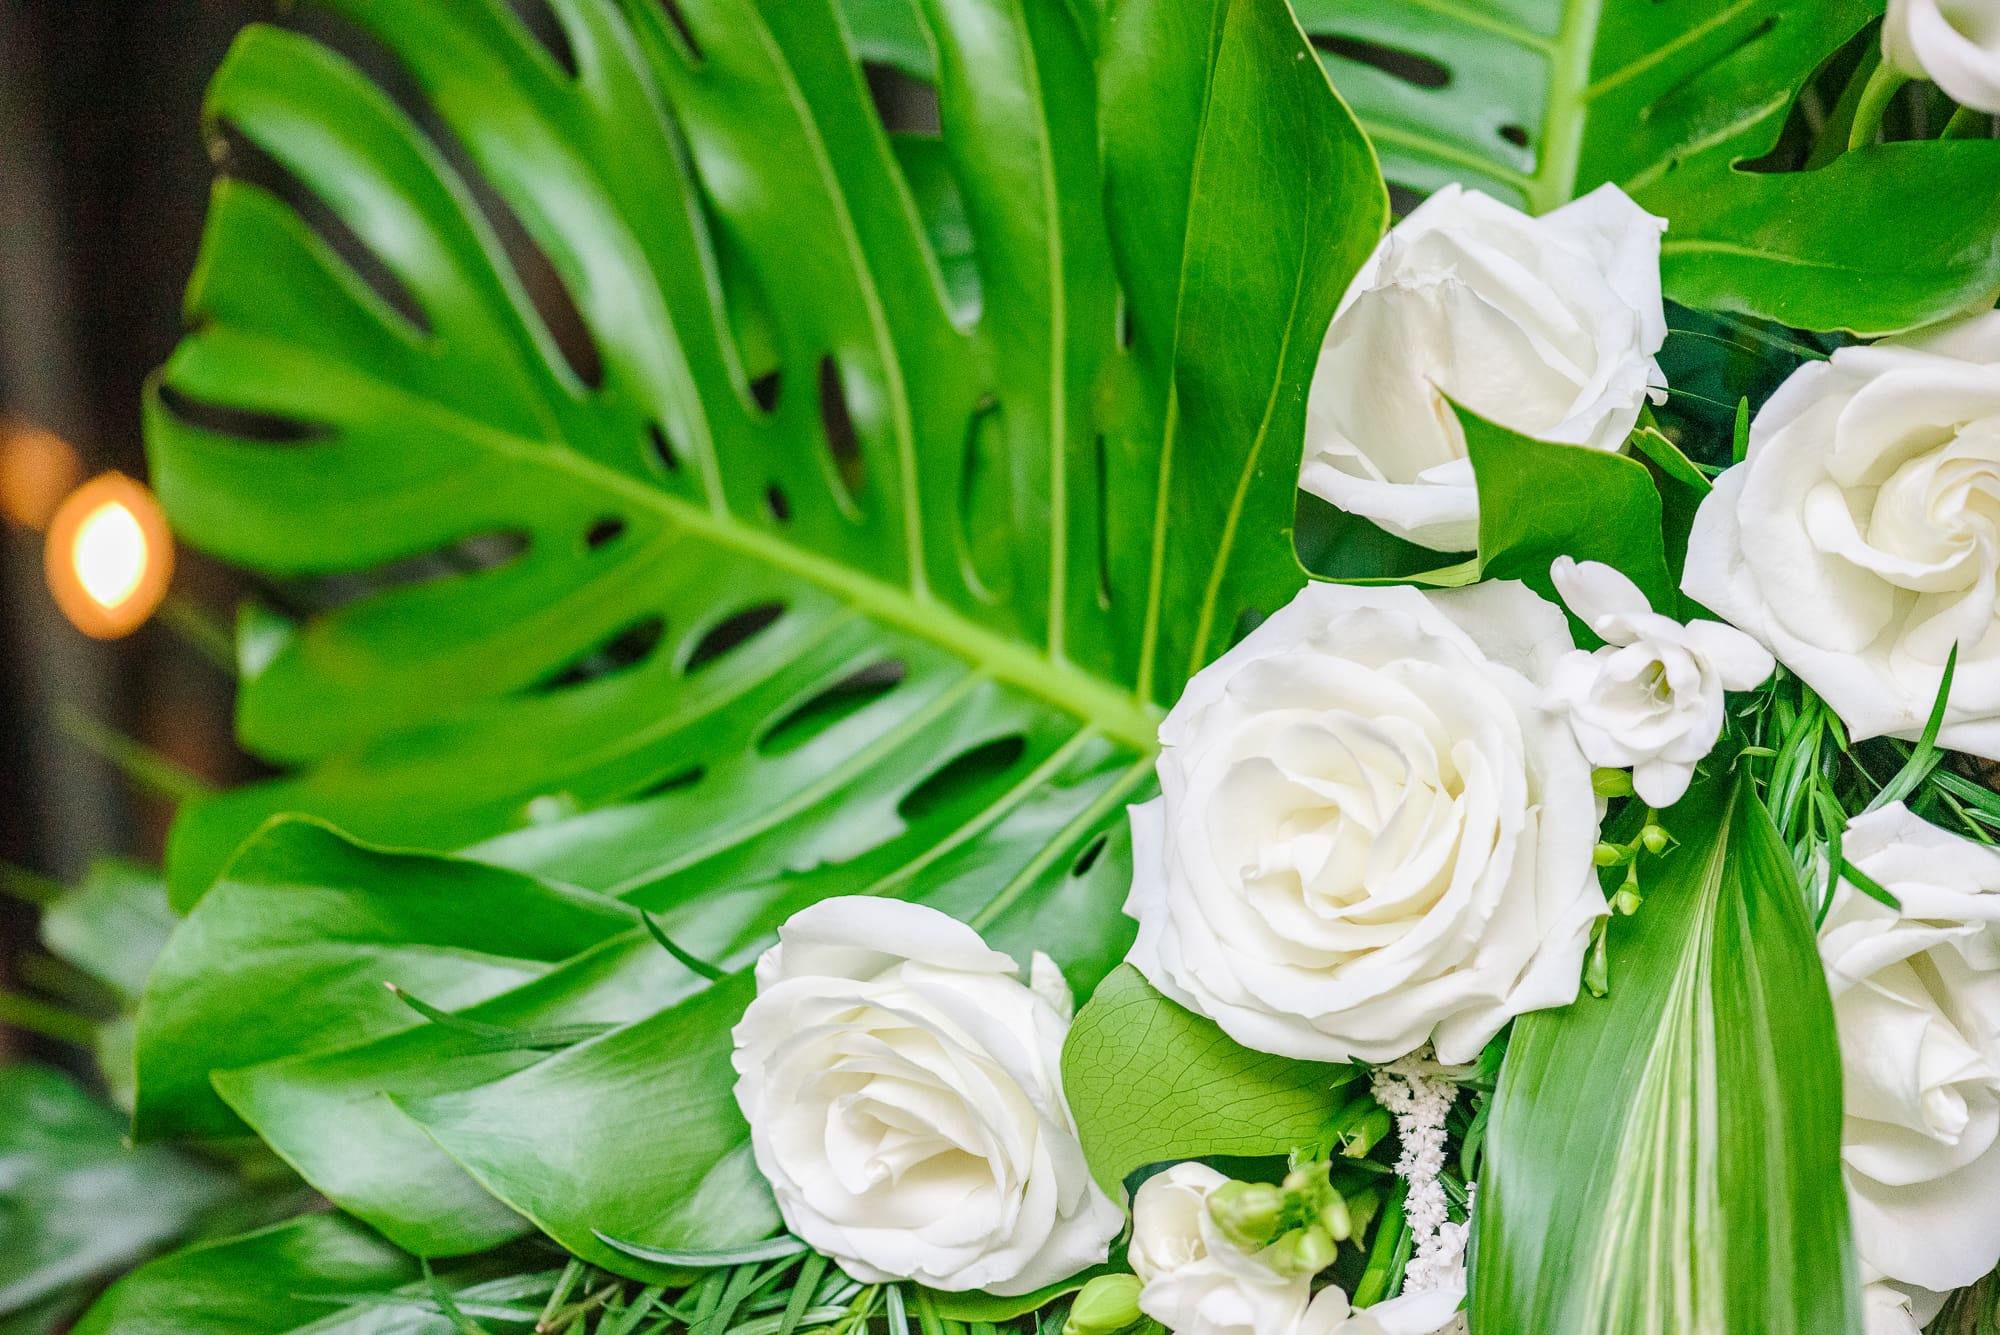 Tropical leaves and white roses make up this bouquet at this Camelot Meadows wedding.